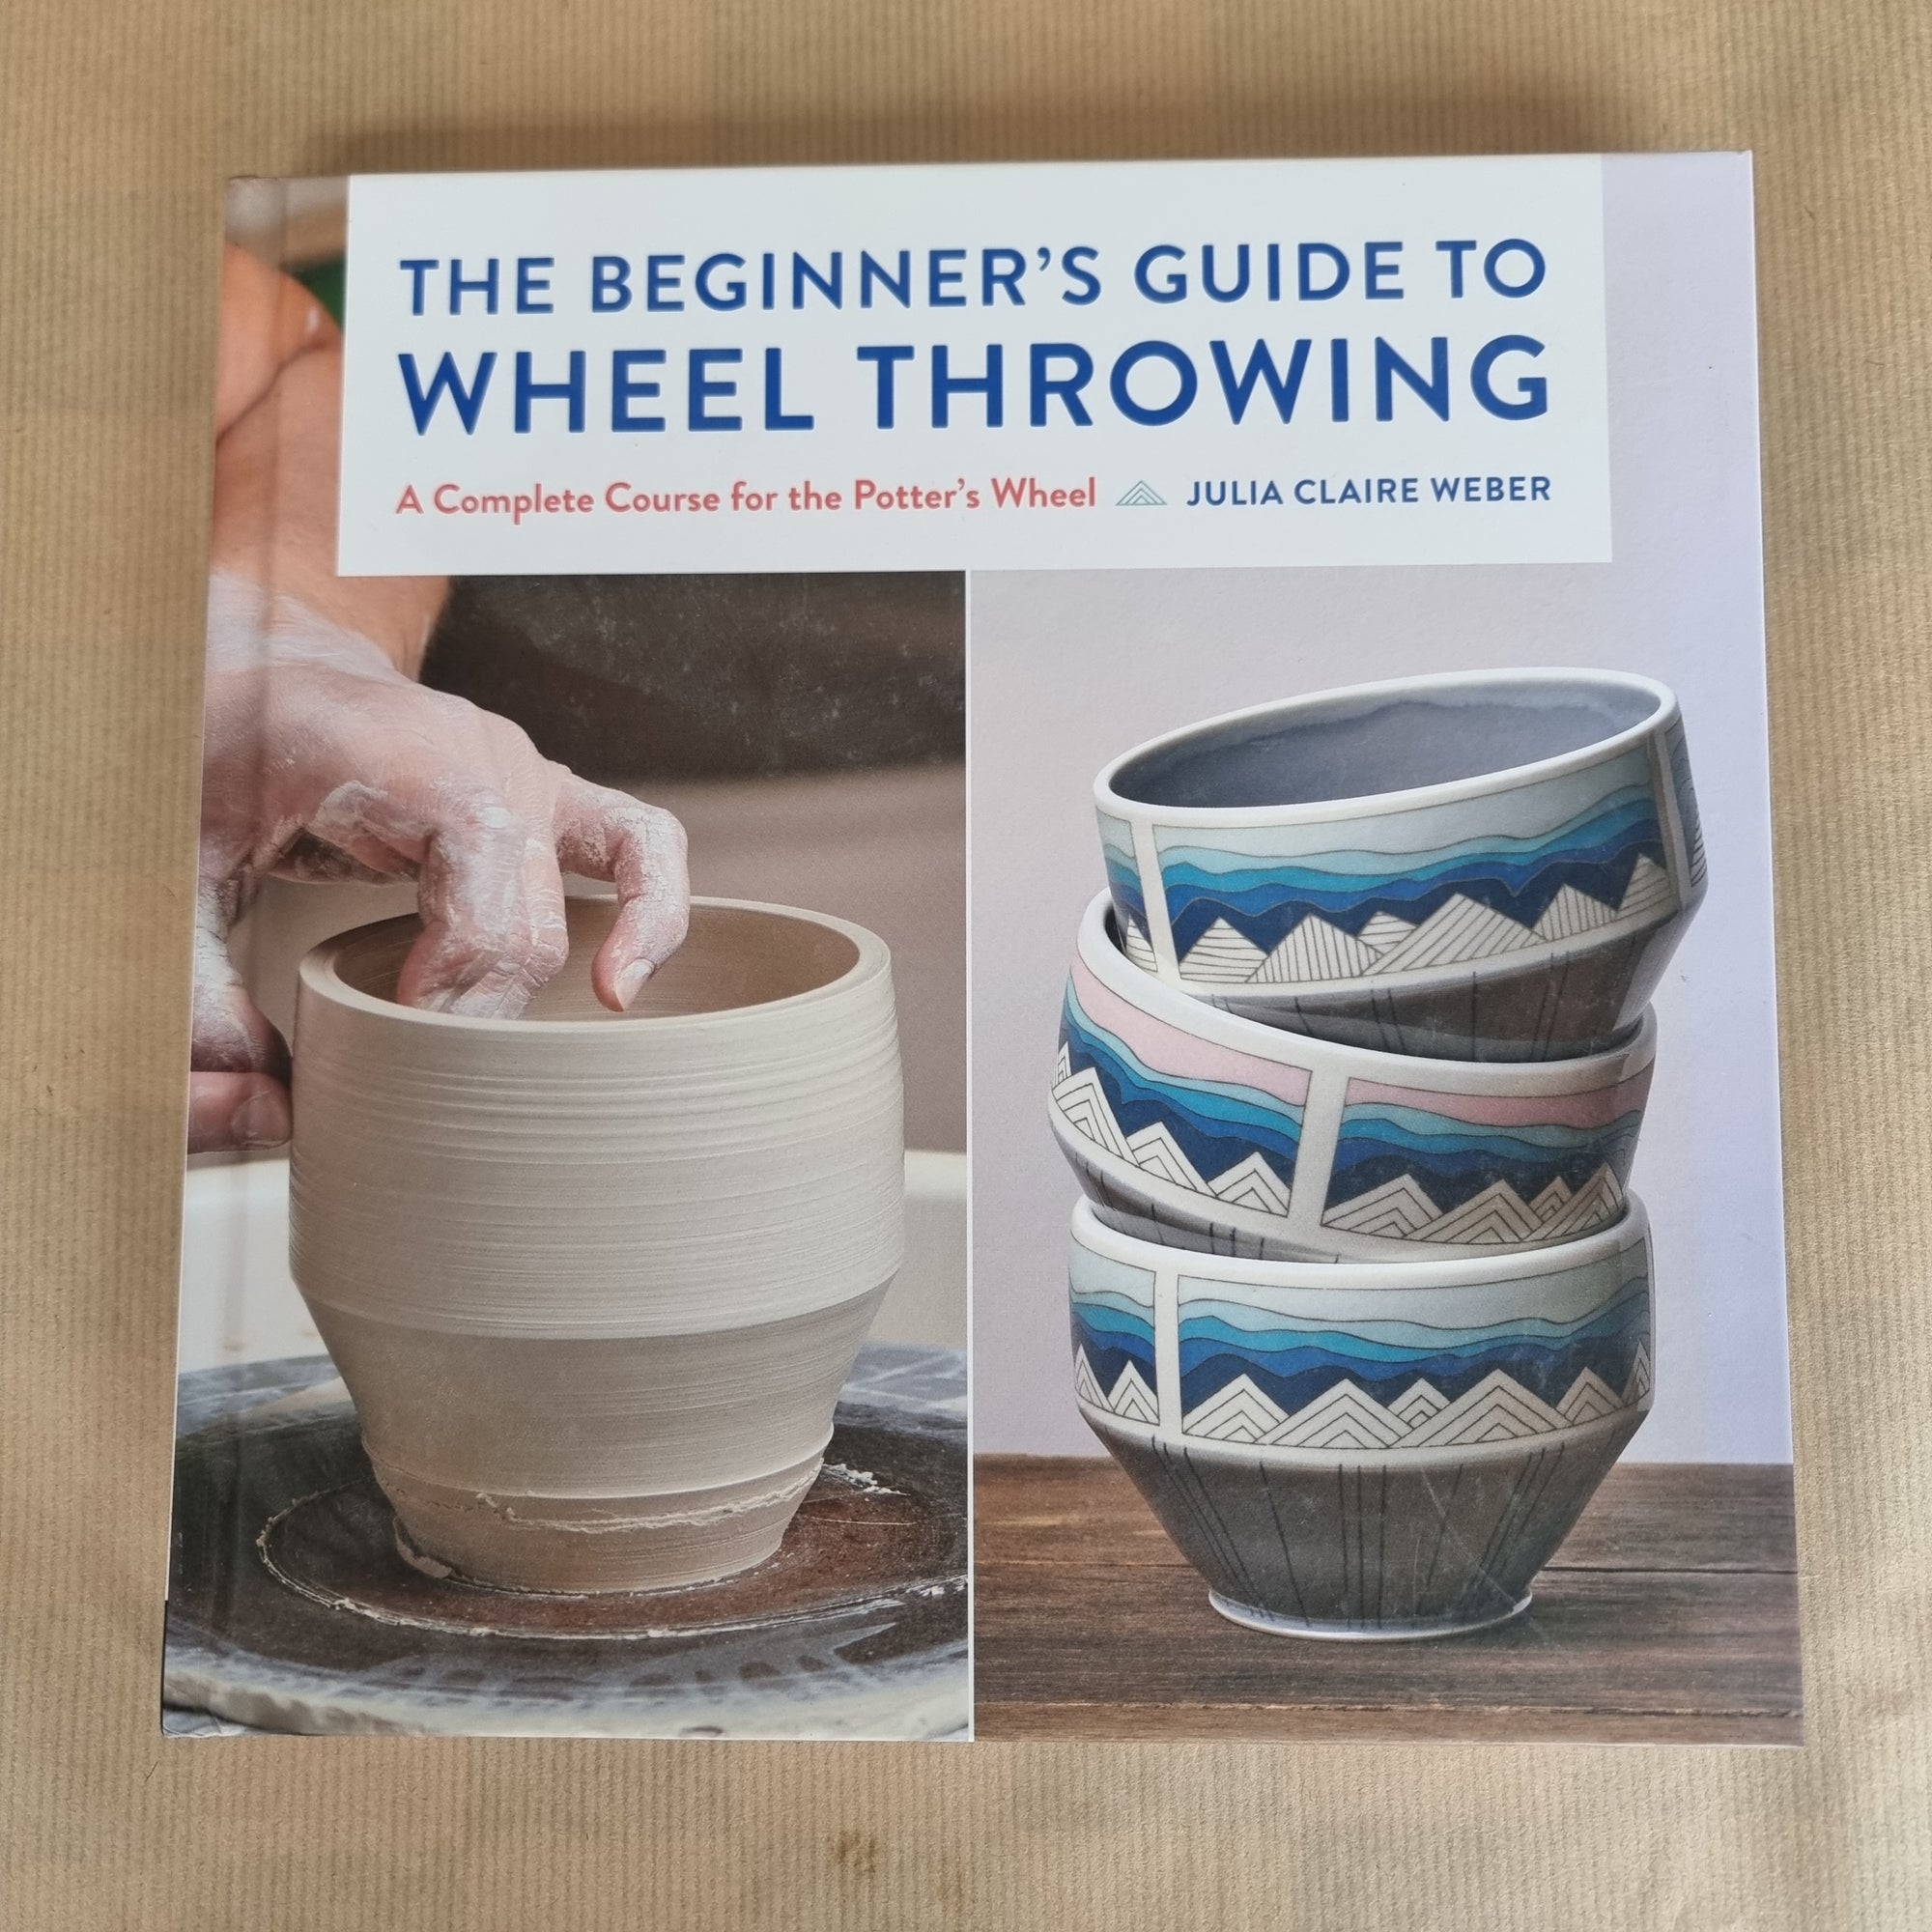 The Beginner's Guide To Wheel Throwing